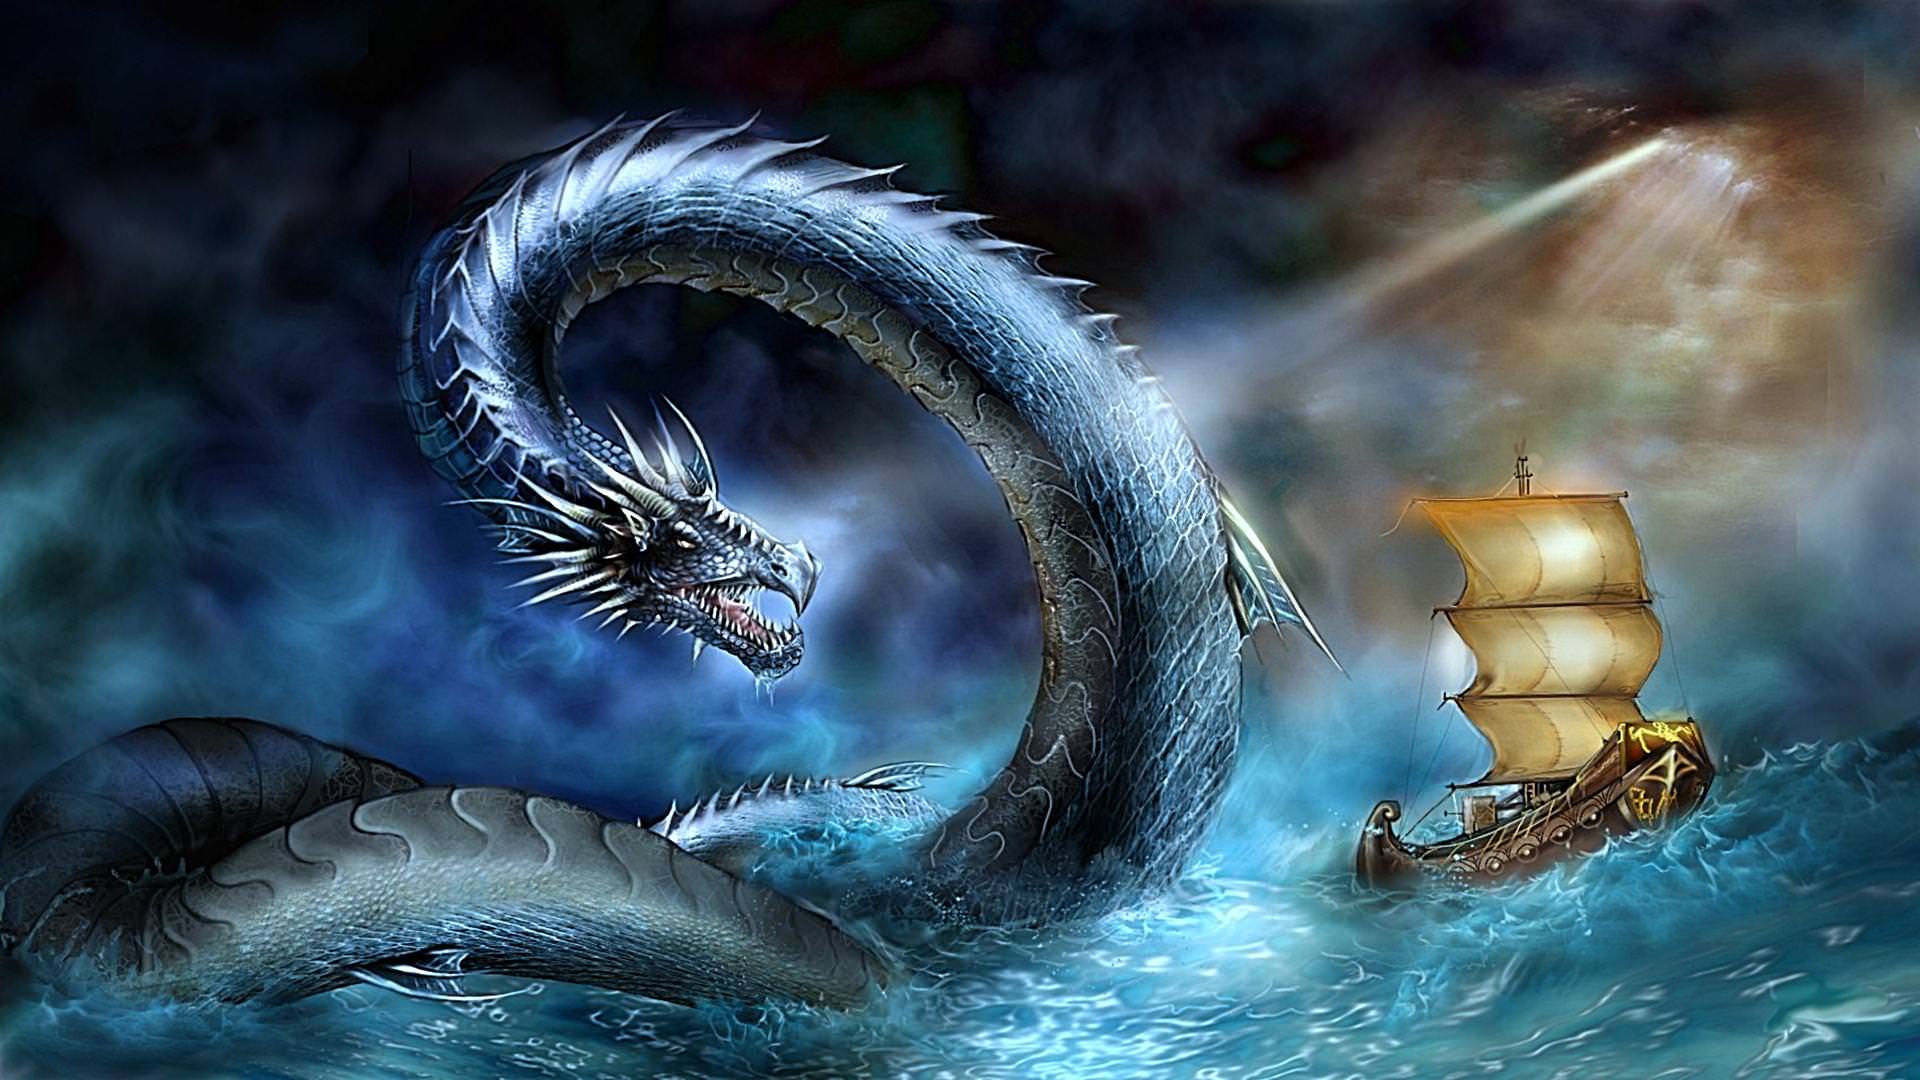 21 Dragon Wallpapers Backgrounds Images FreeCreatives